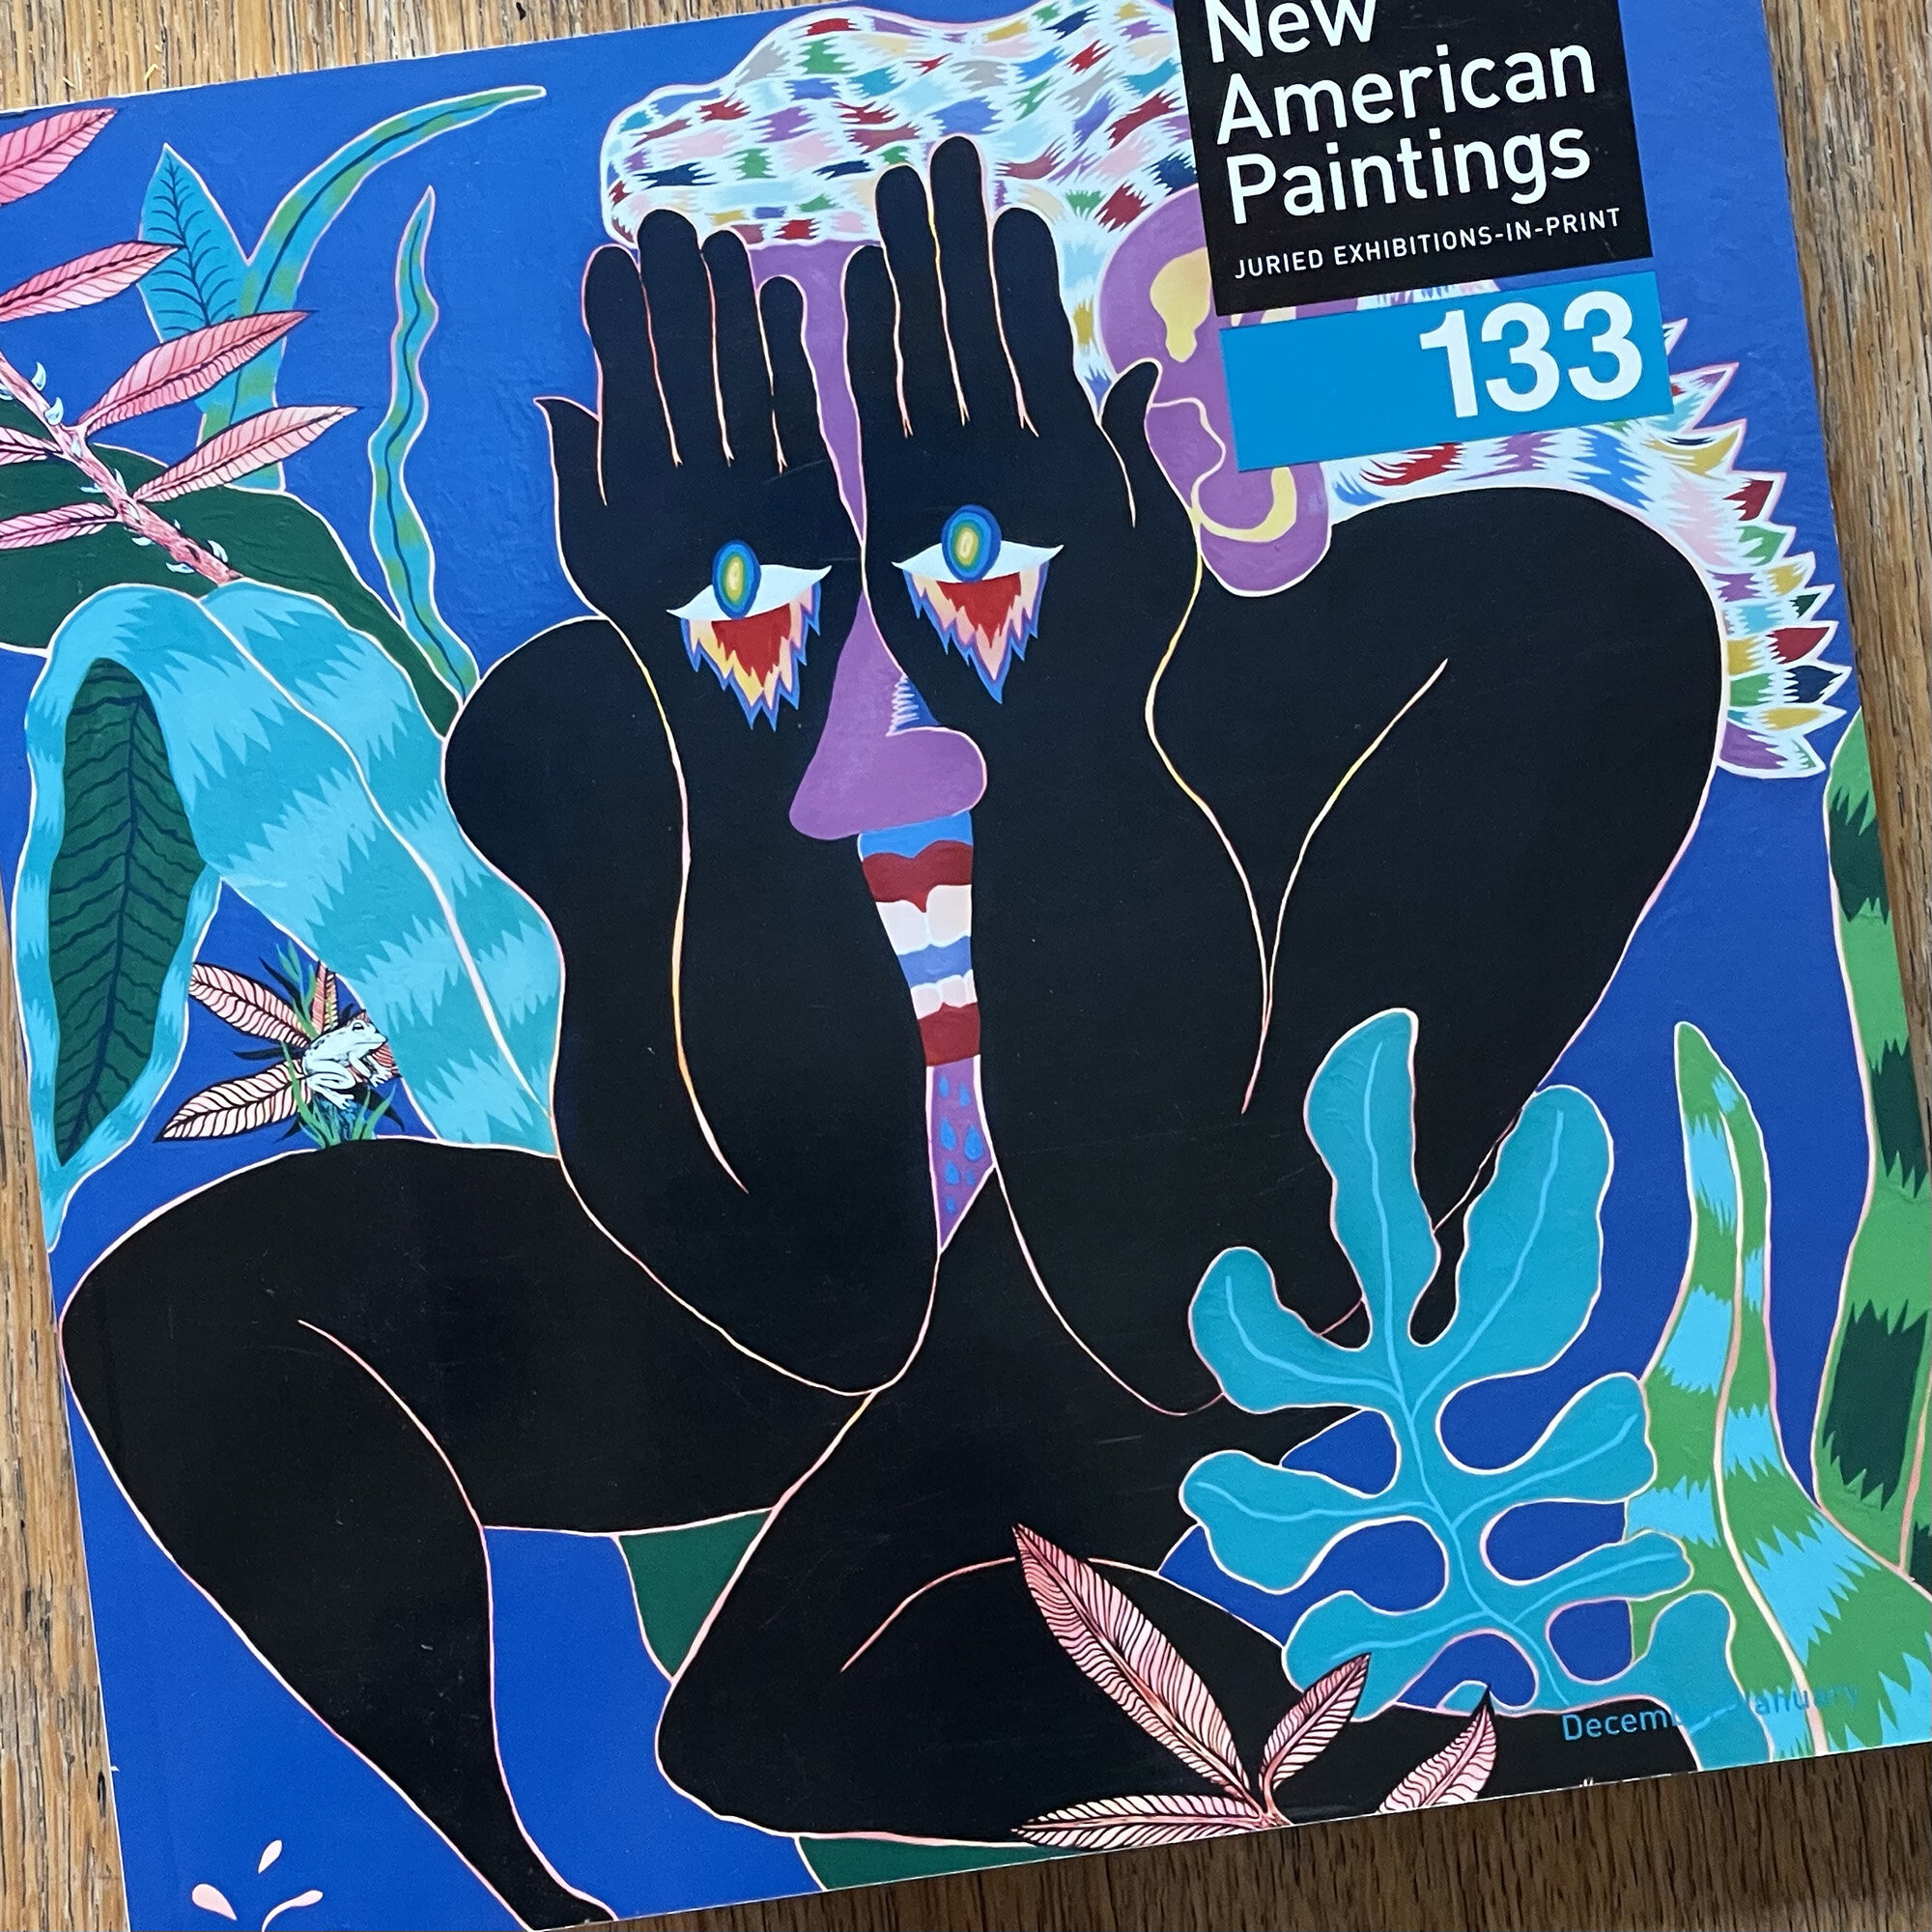 New American Paintings 133 featuring work by Frank J. Stockton a